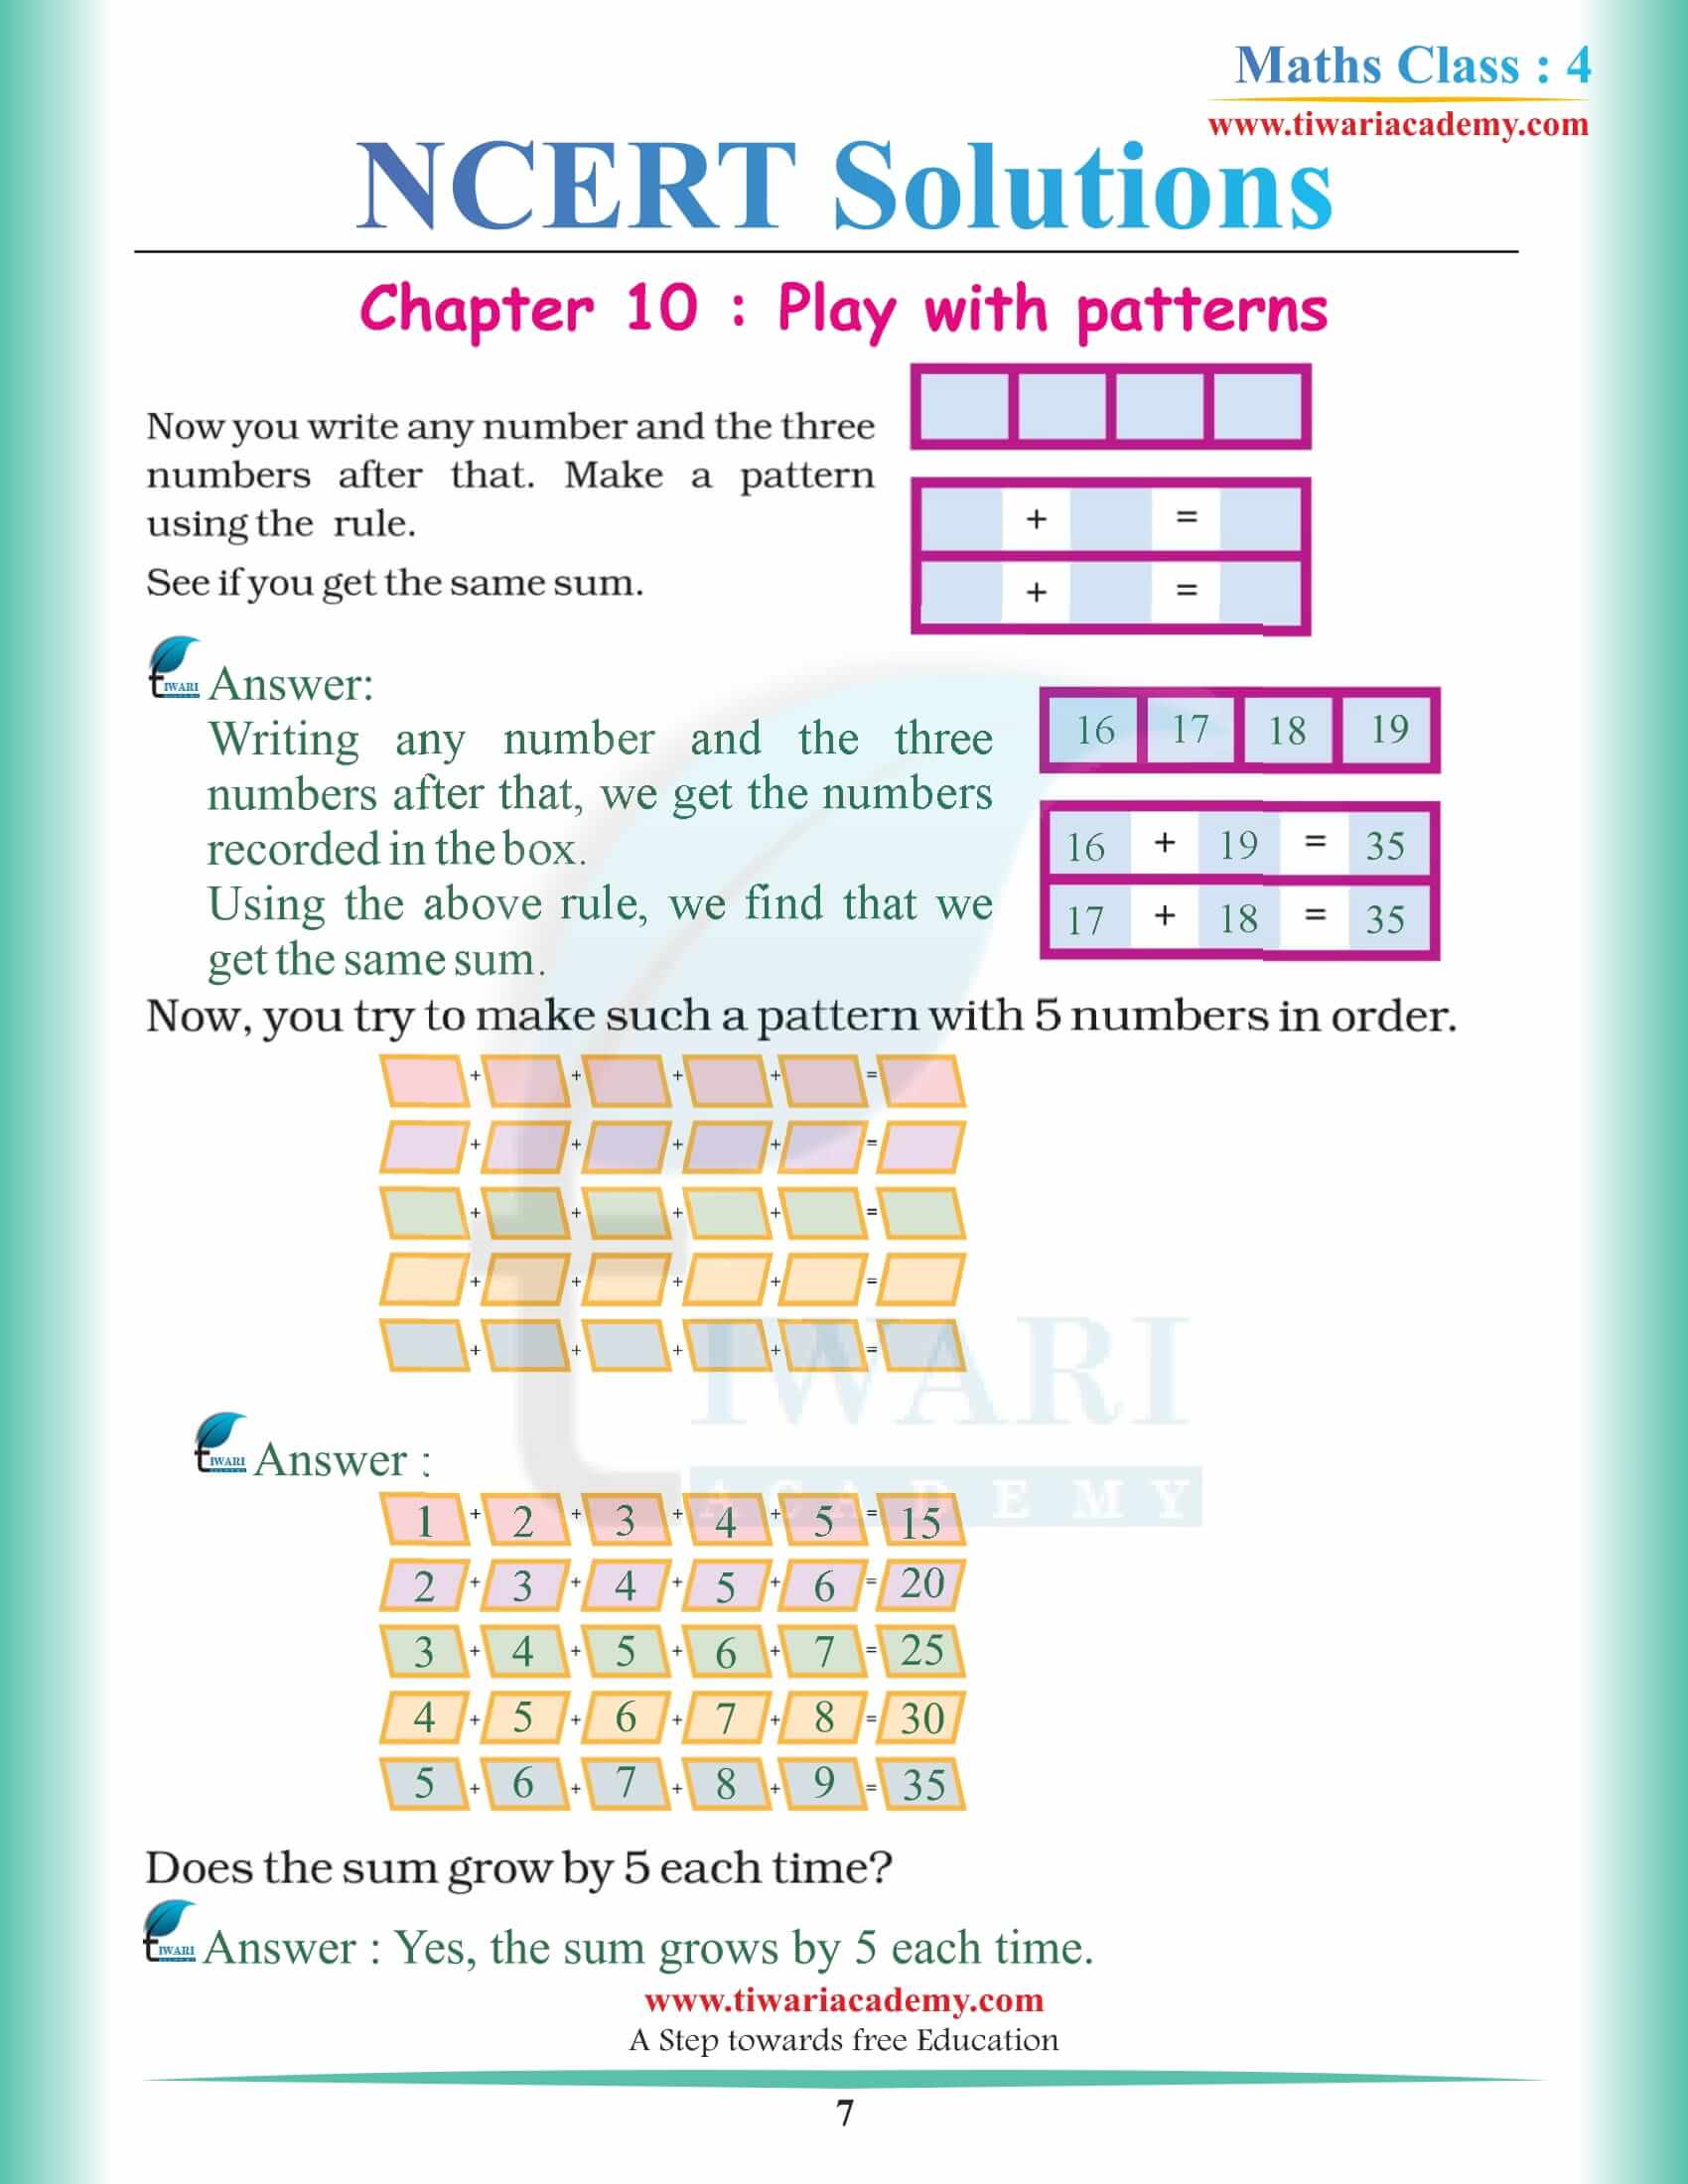 NCERT Solutions for Class 4 Maths Chapter 10 guide